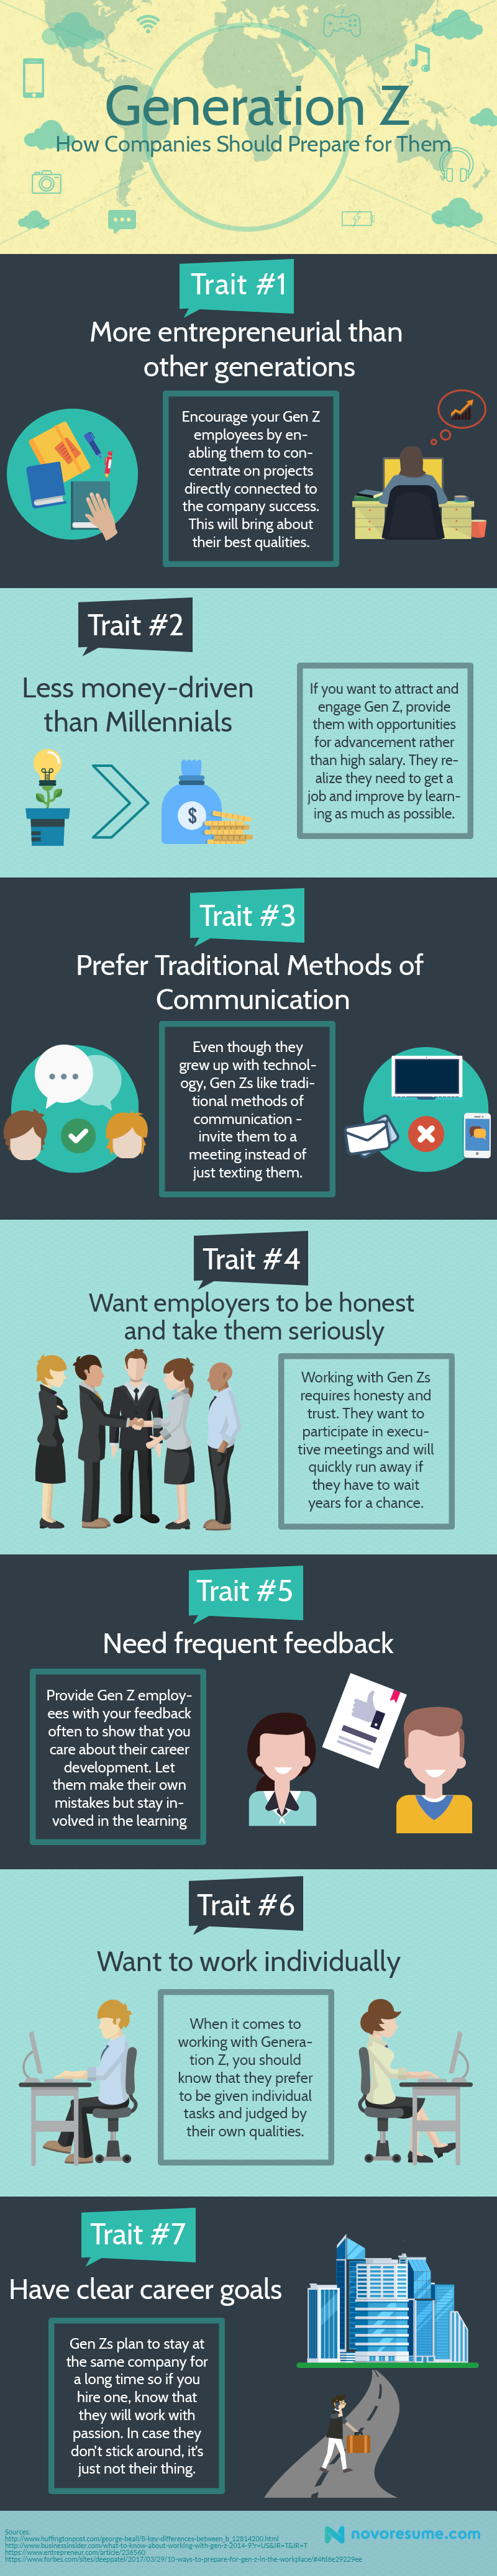 Infographic - How Companies Should Prepare for Generation Z